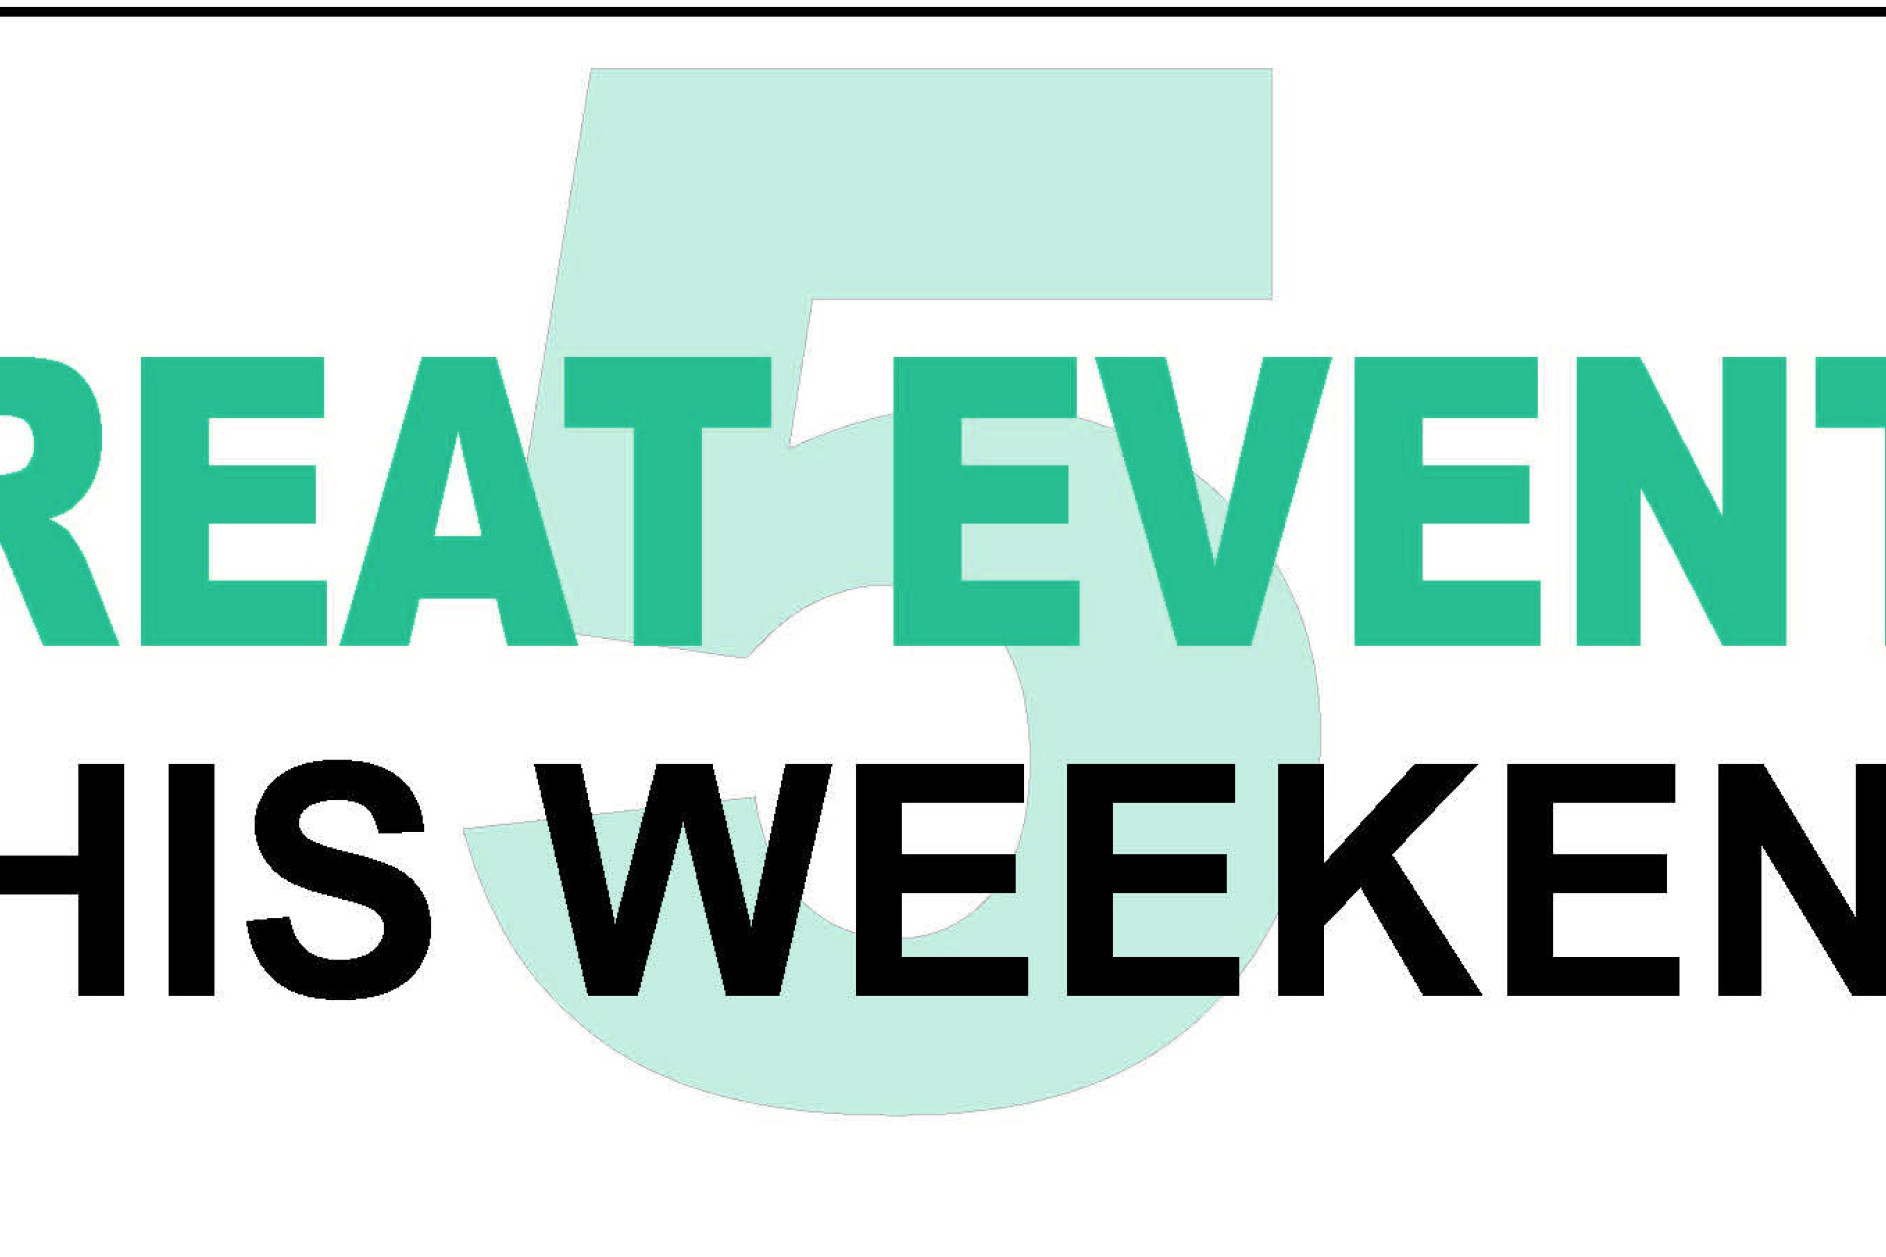 5 Great Events this weekend - Feb 26-28 - feature photo